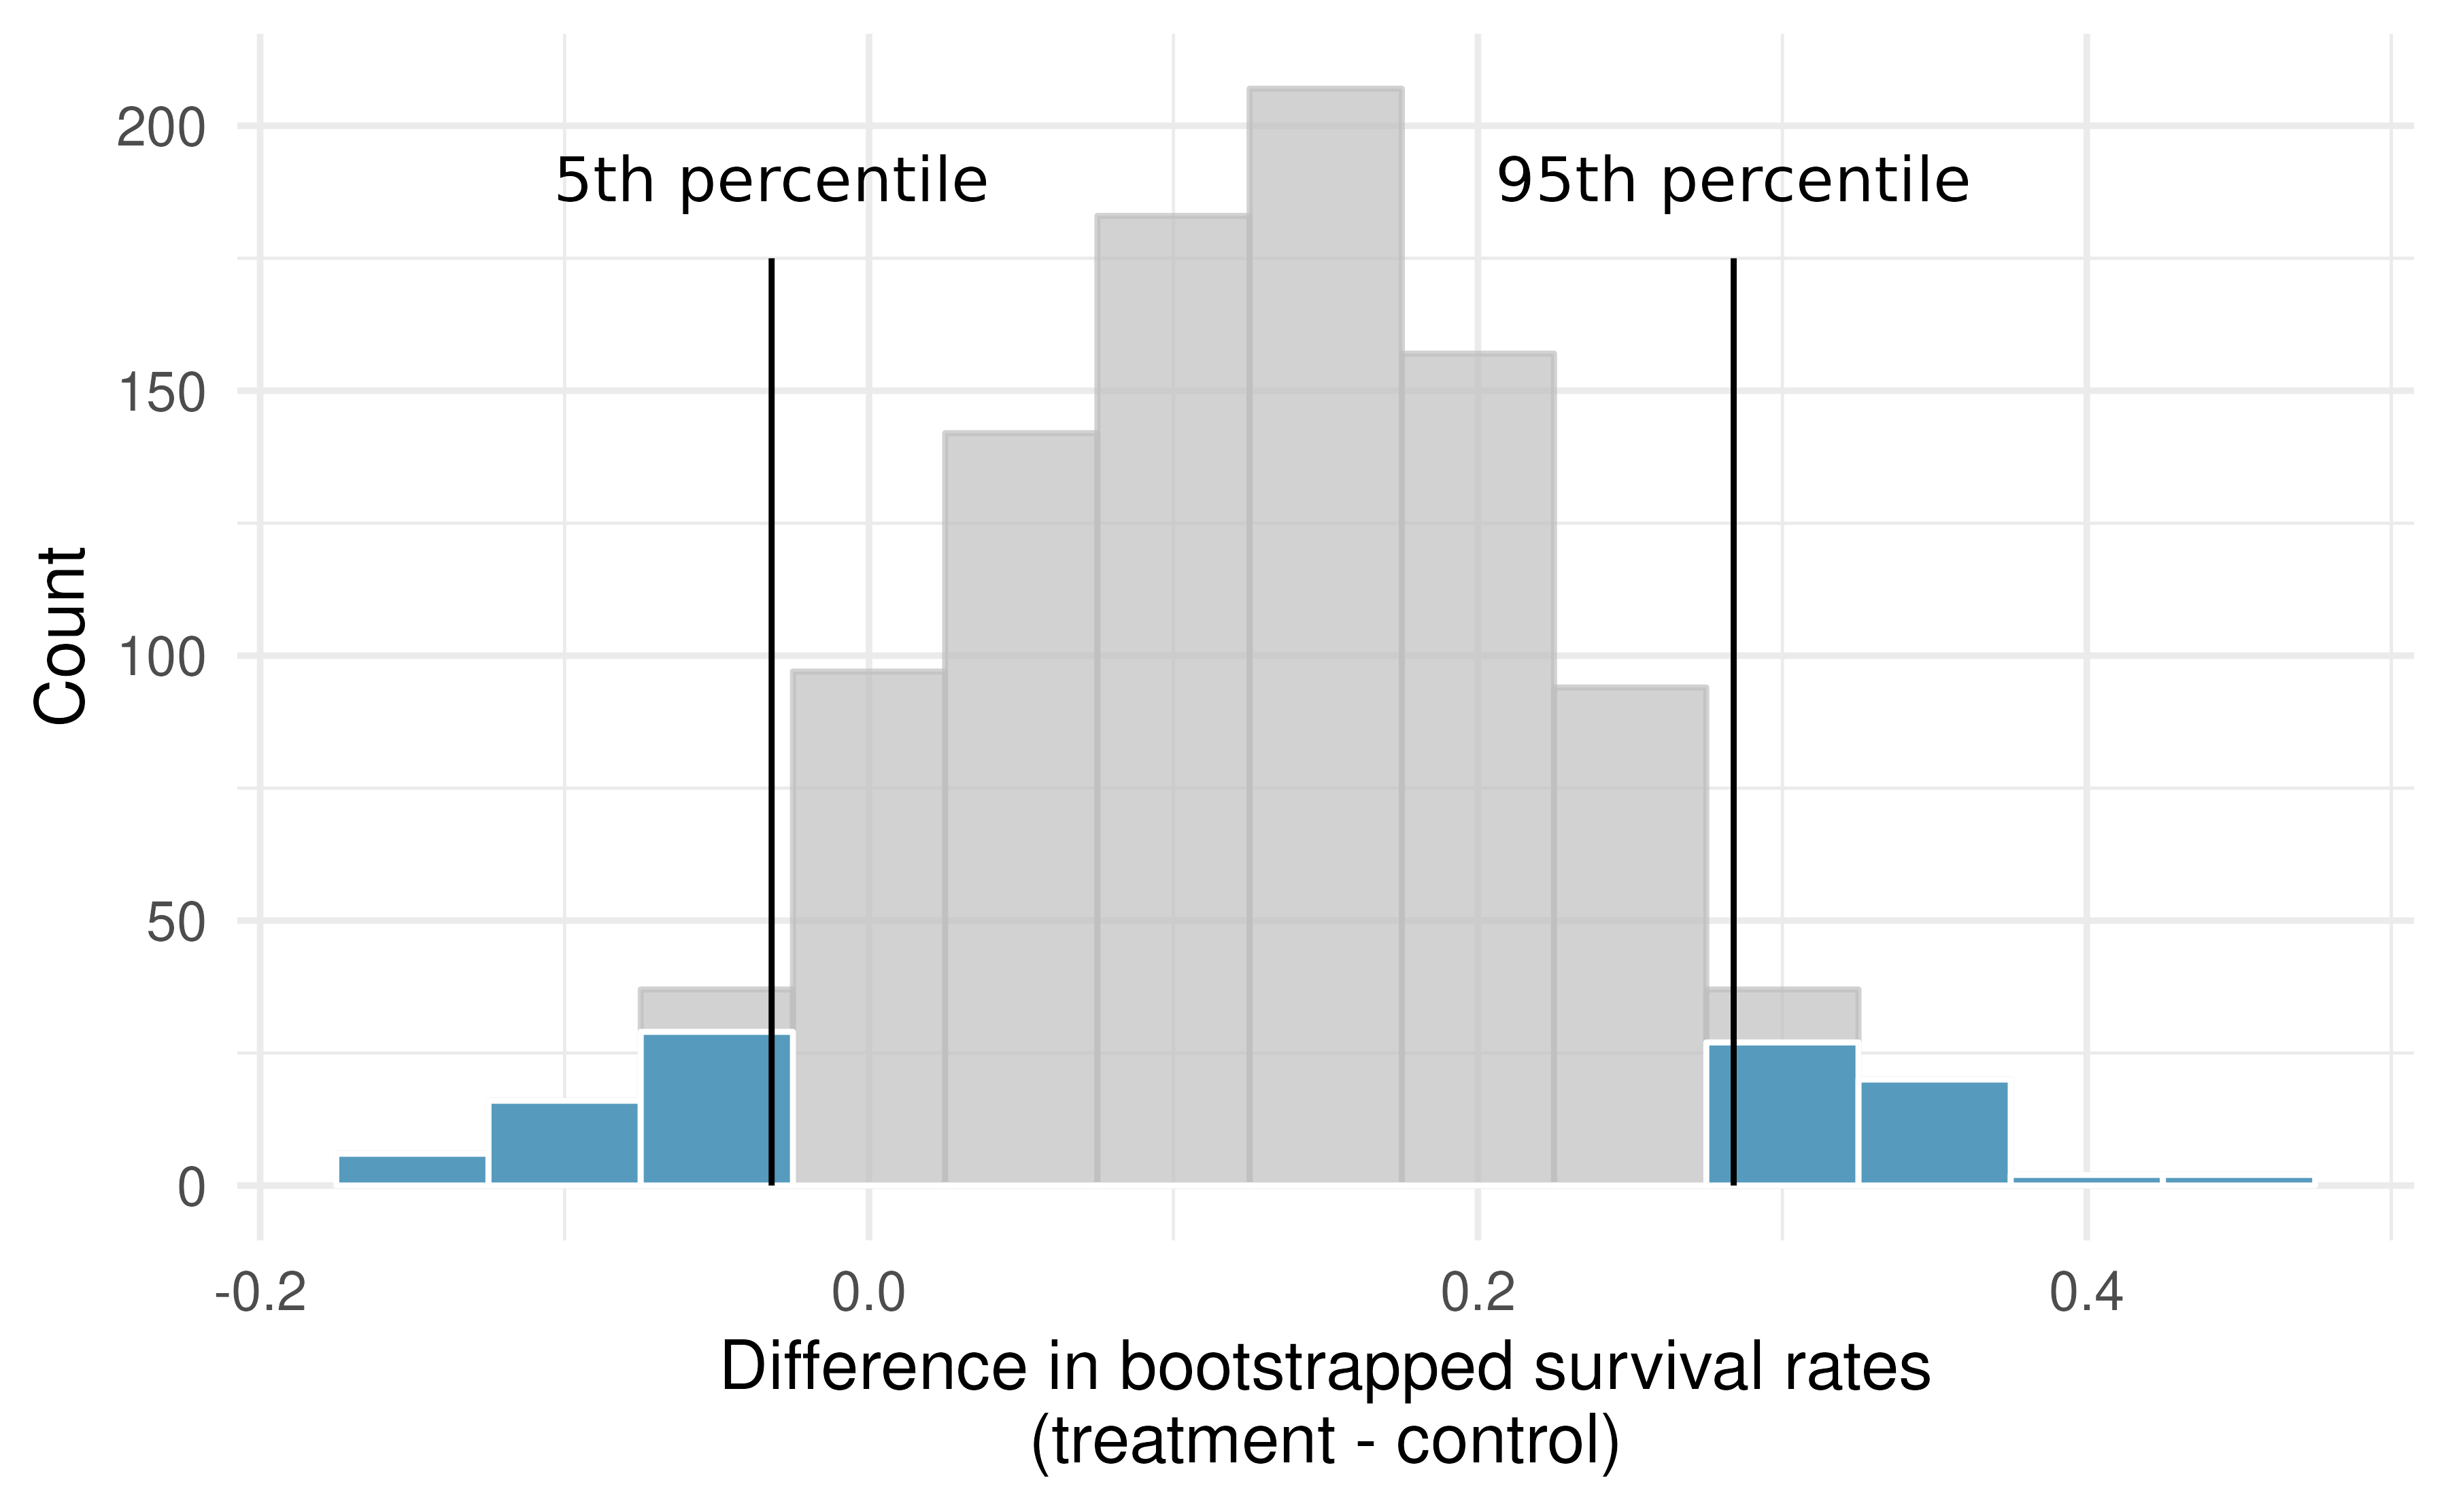 The CPR data is bootstrapped 1,000 times. Each simulation creates a sample from the original data where the probability of survival in the treatment group is $\hat{p}_{T}  = 14/40$ and the probability of survival in the control group is $\hat{p}_{C} = 11/50.$ 